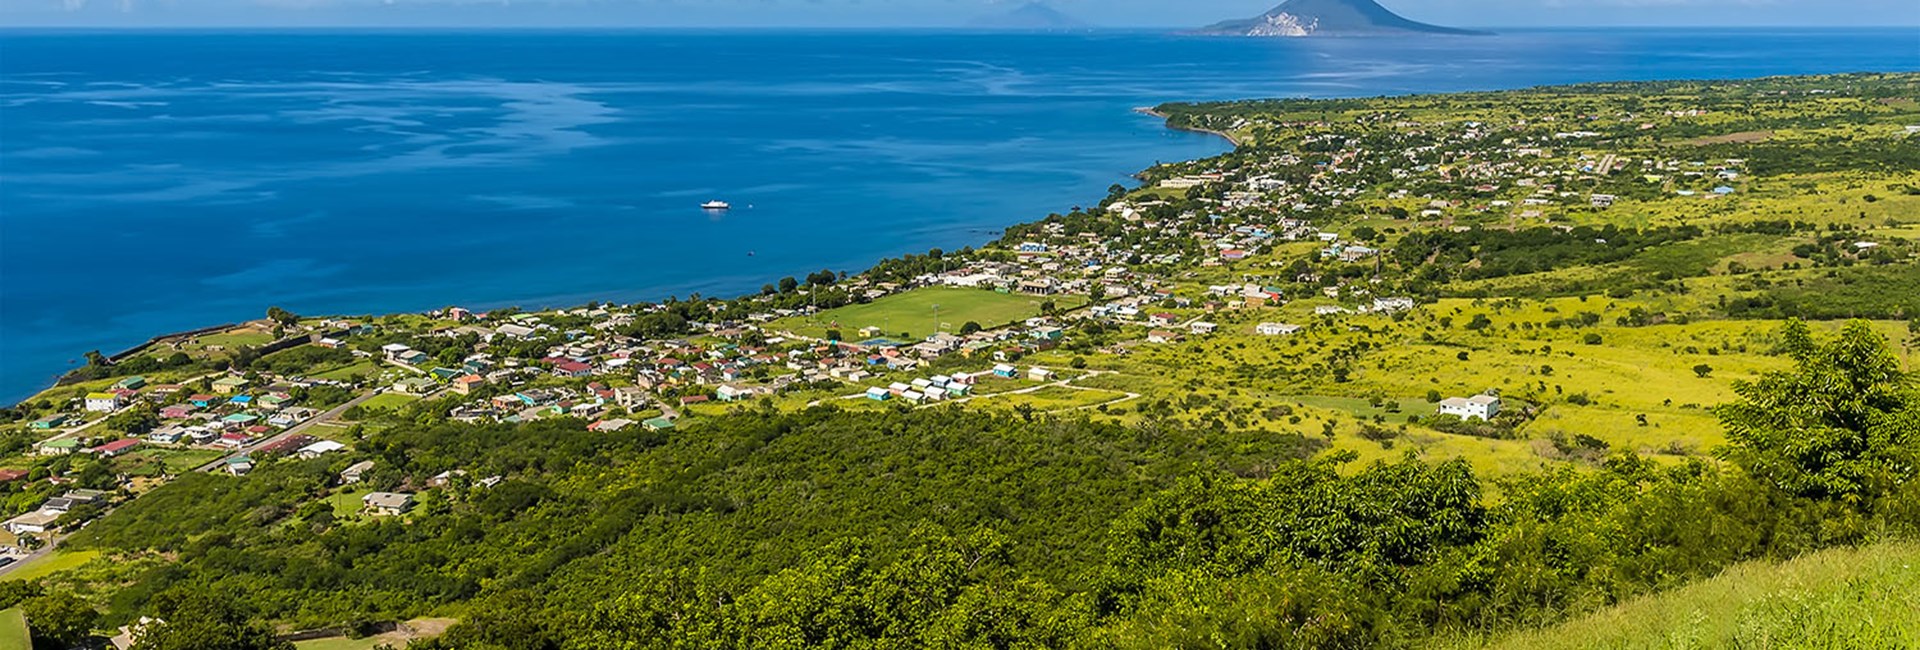 View from hill of a coastal town on a tropical island 